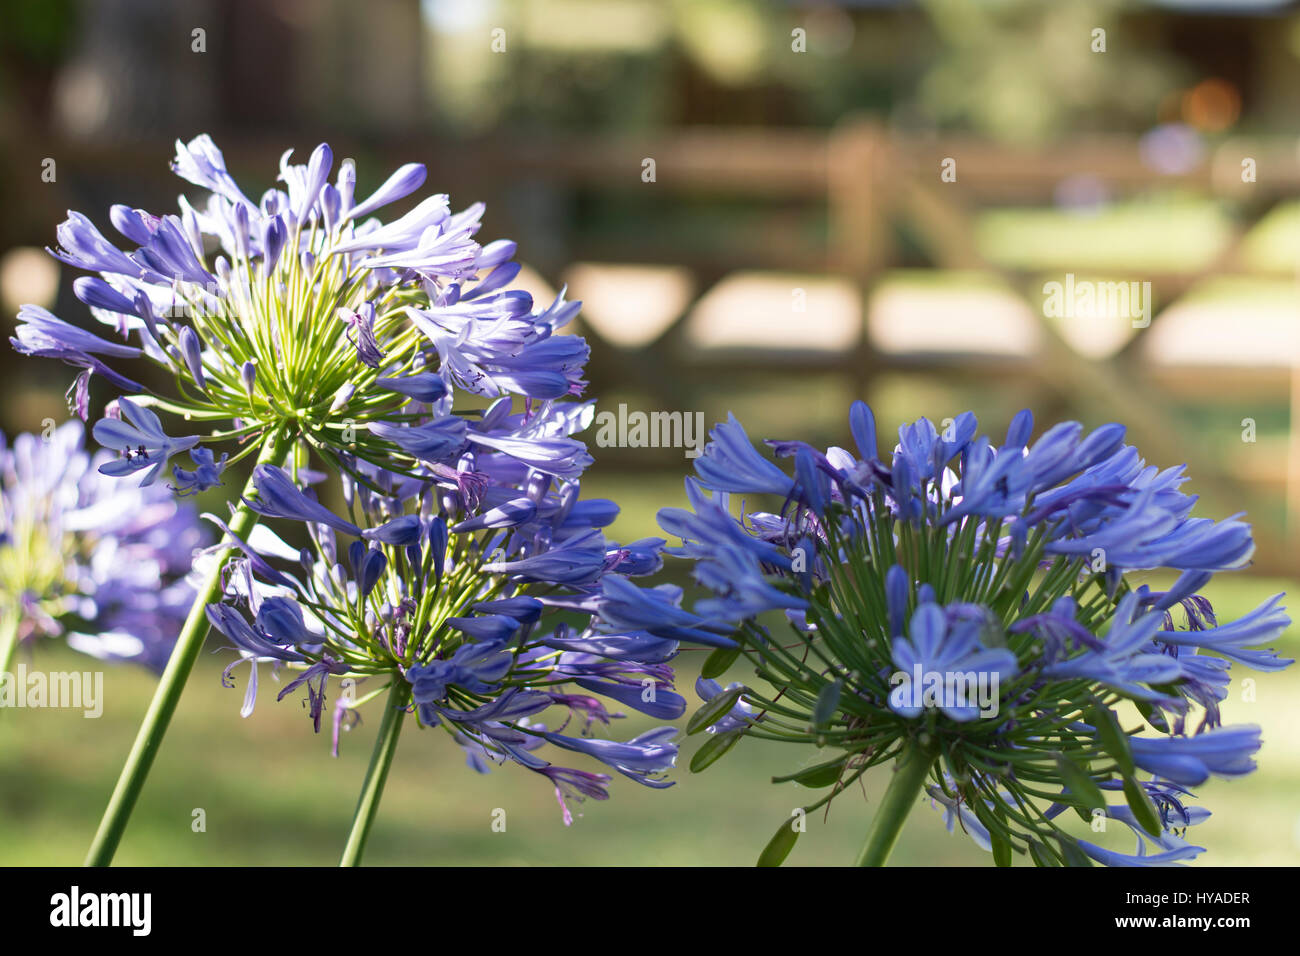 Agapanthus flowers, blue african lily Stock Photo